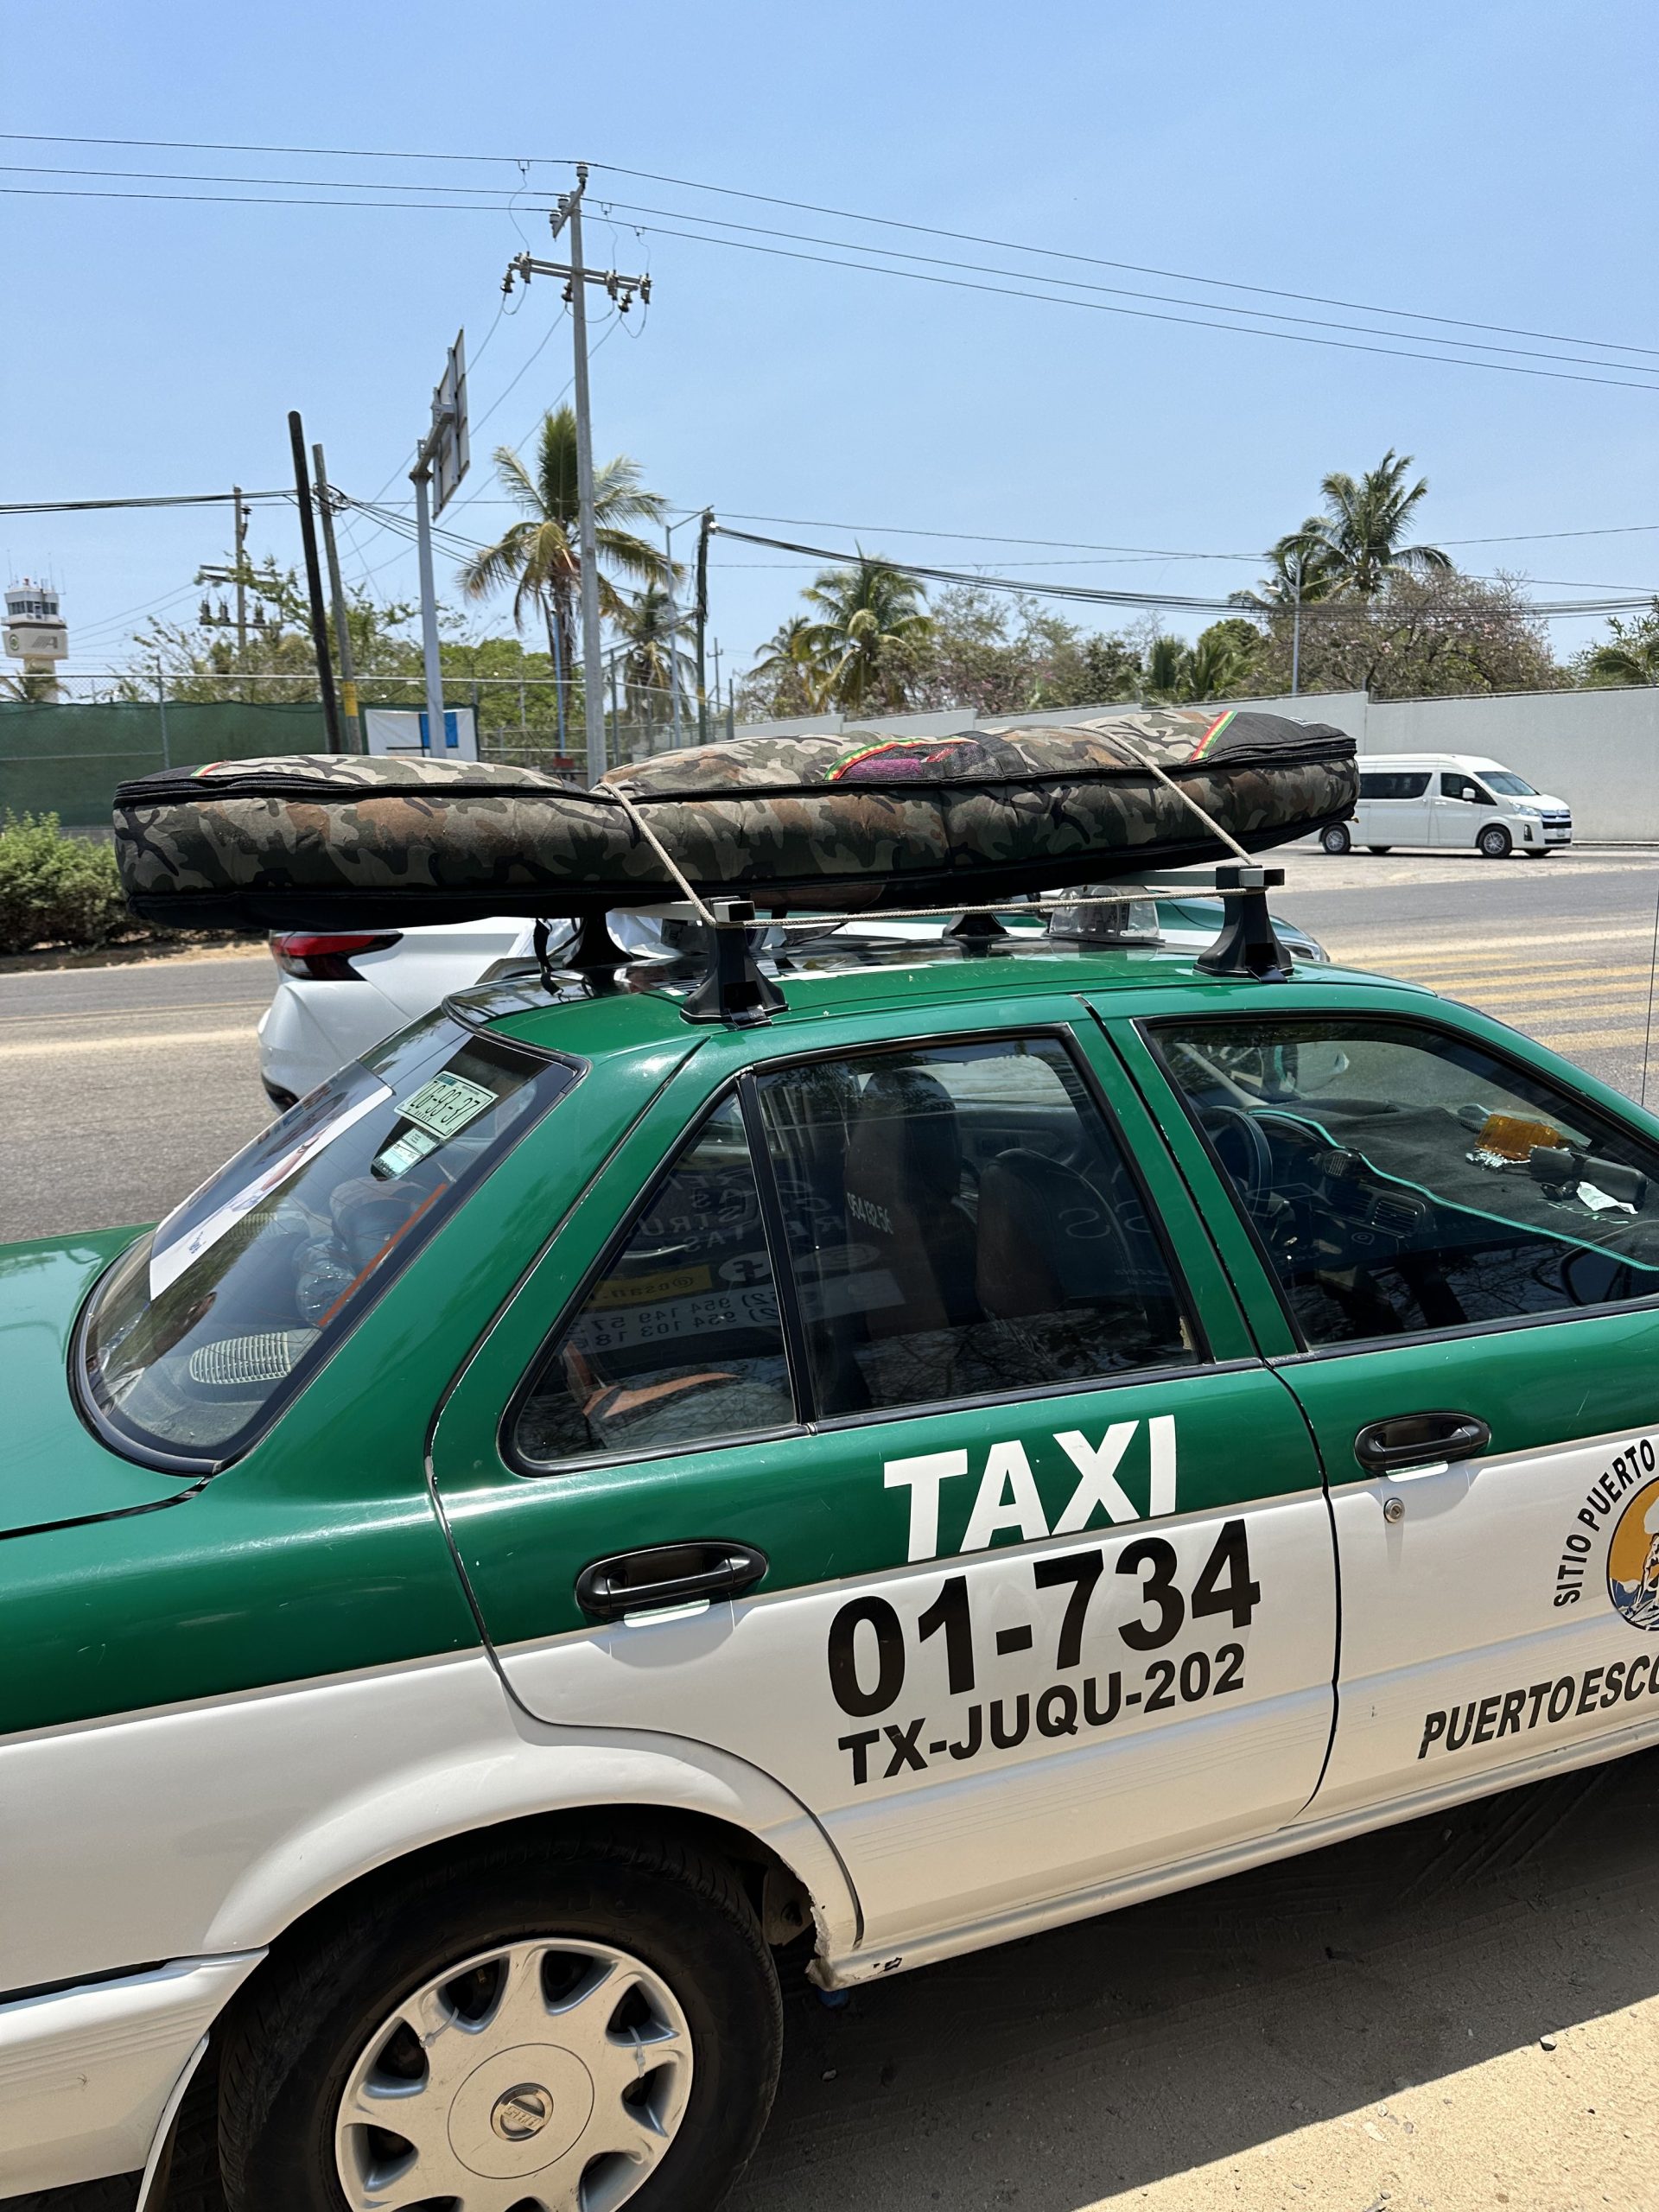 A Complete Guide to Surfing Puerto Escondido